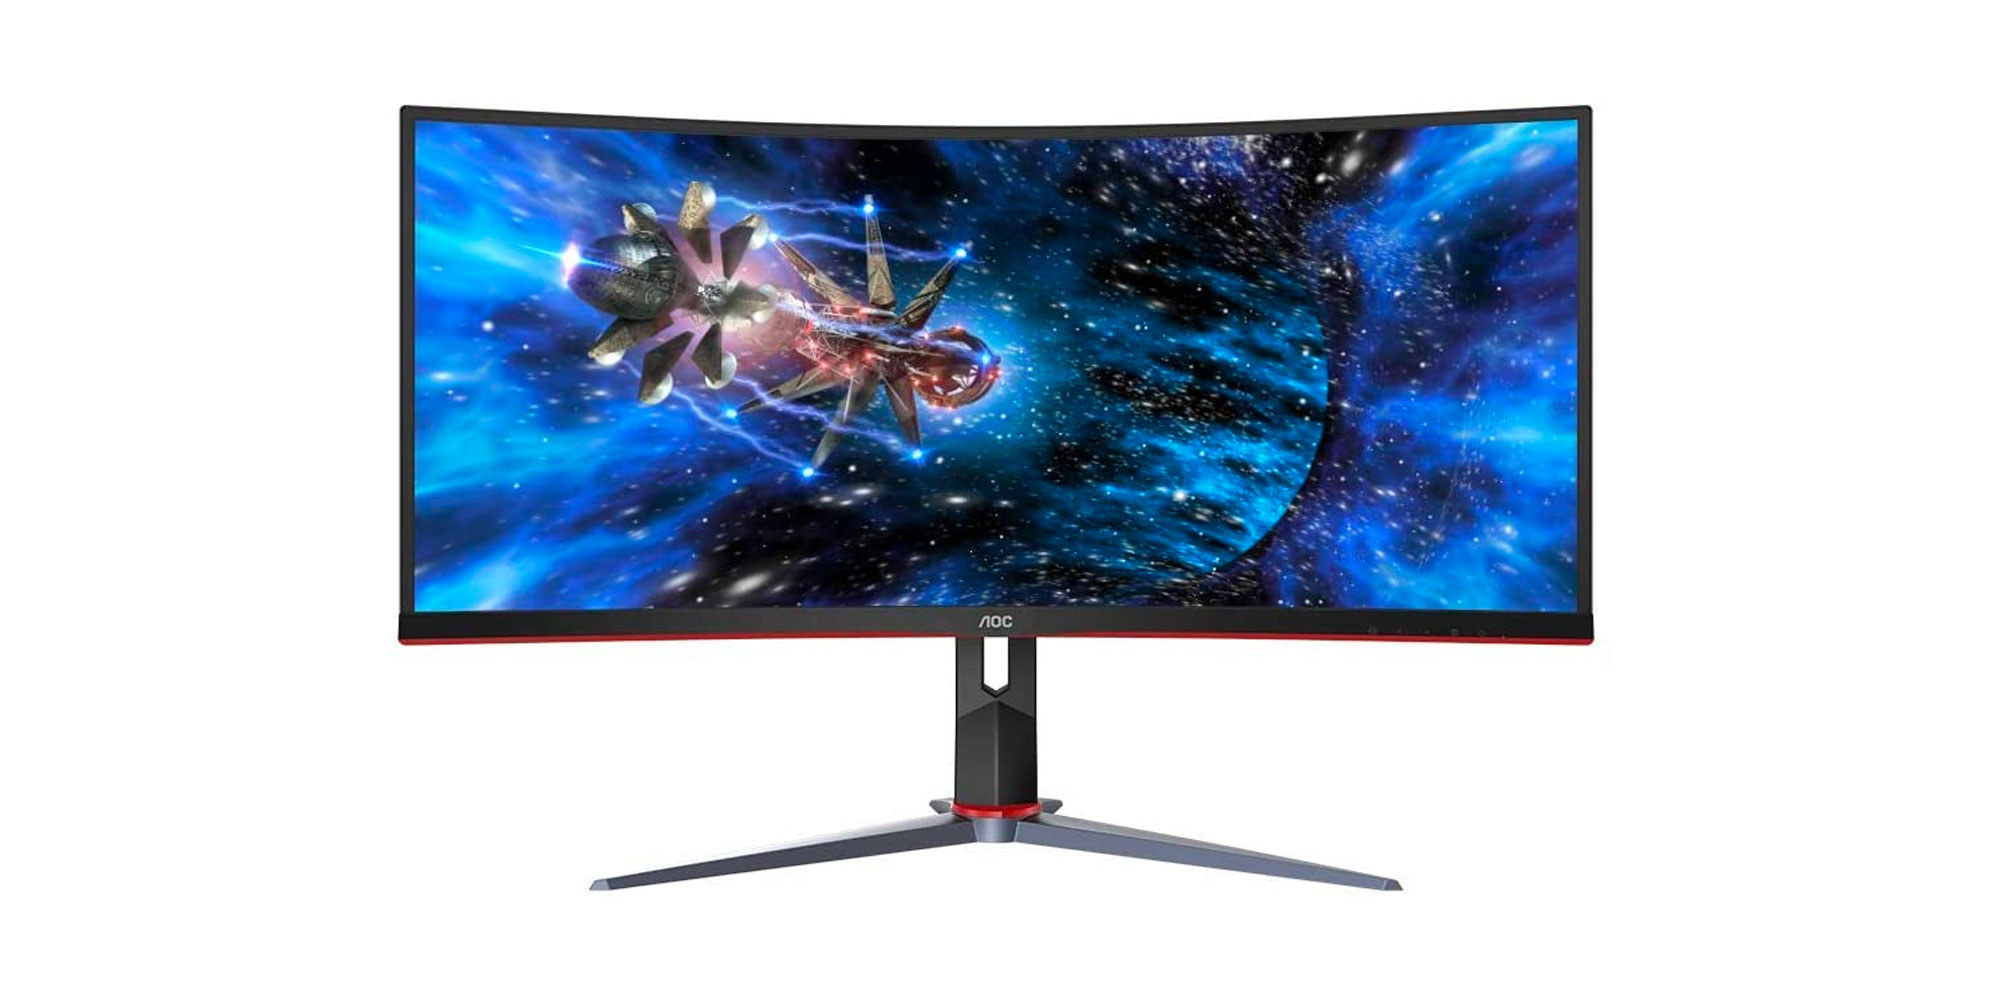 Aoc S Latest 1440p Curved Ultrawide Gaming Monitor Is 144hz 9to5toys